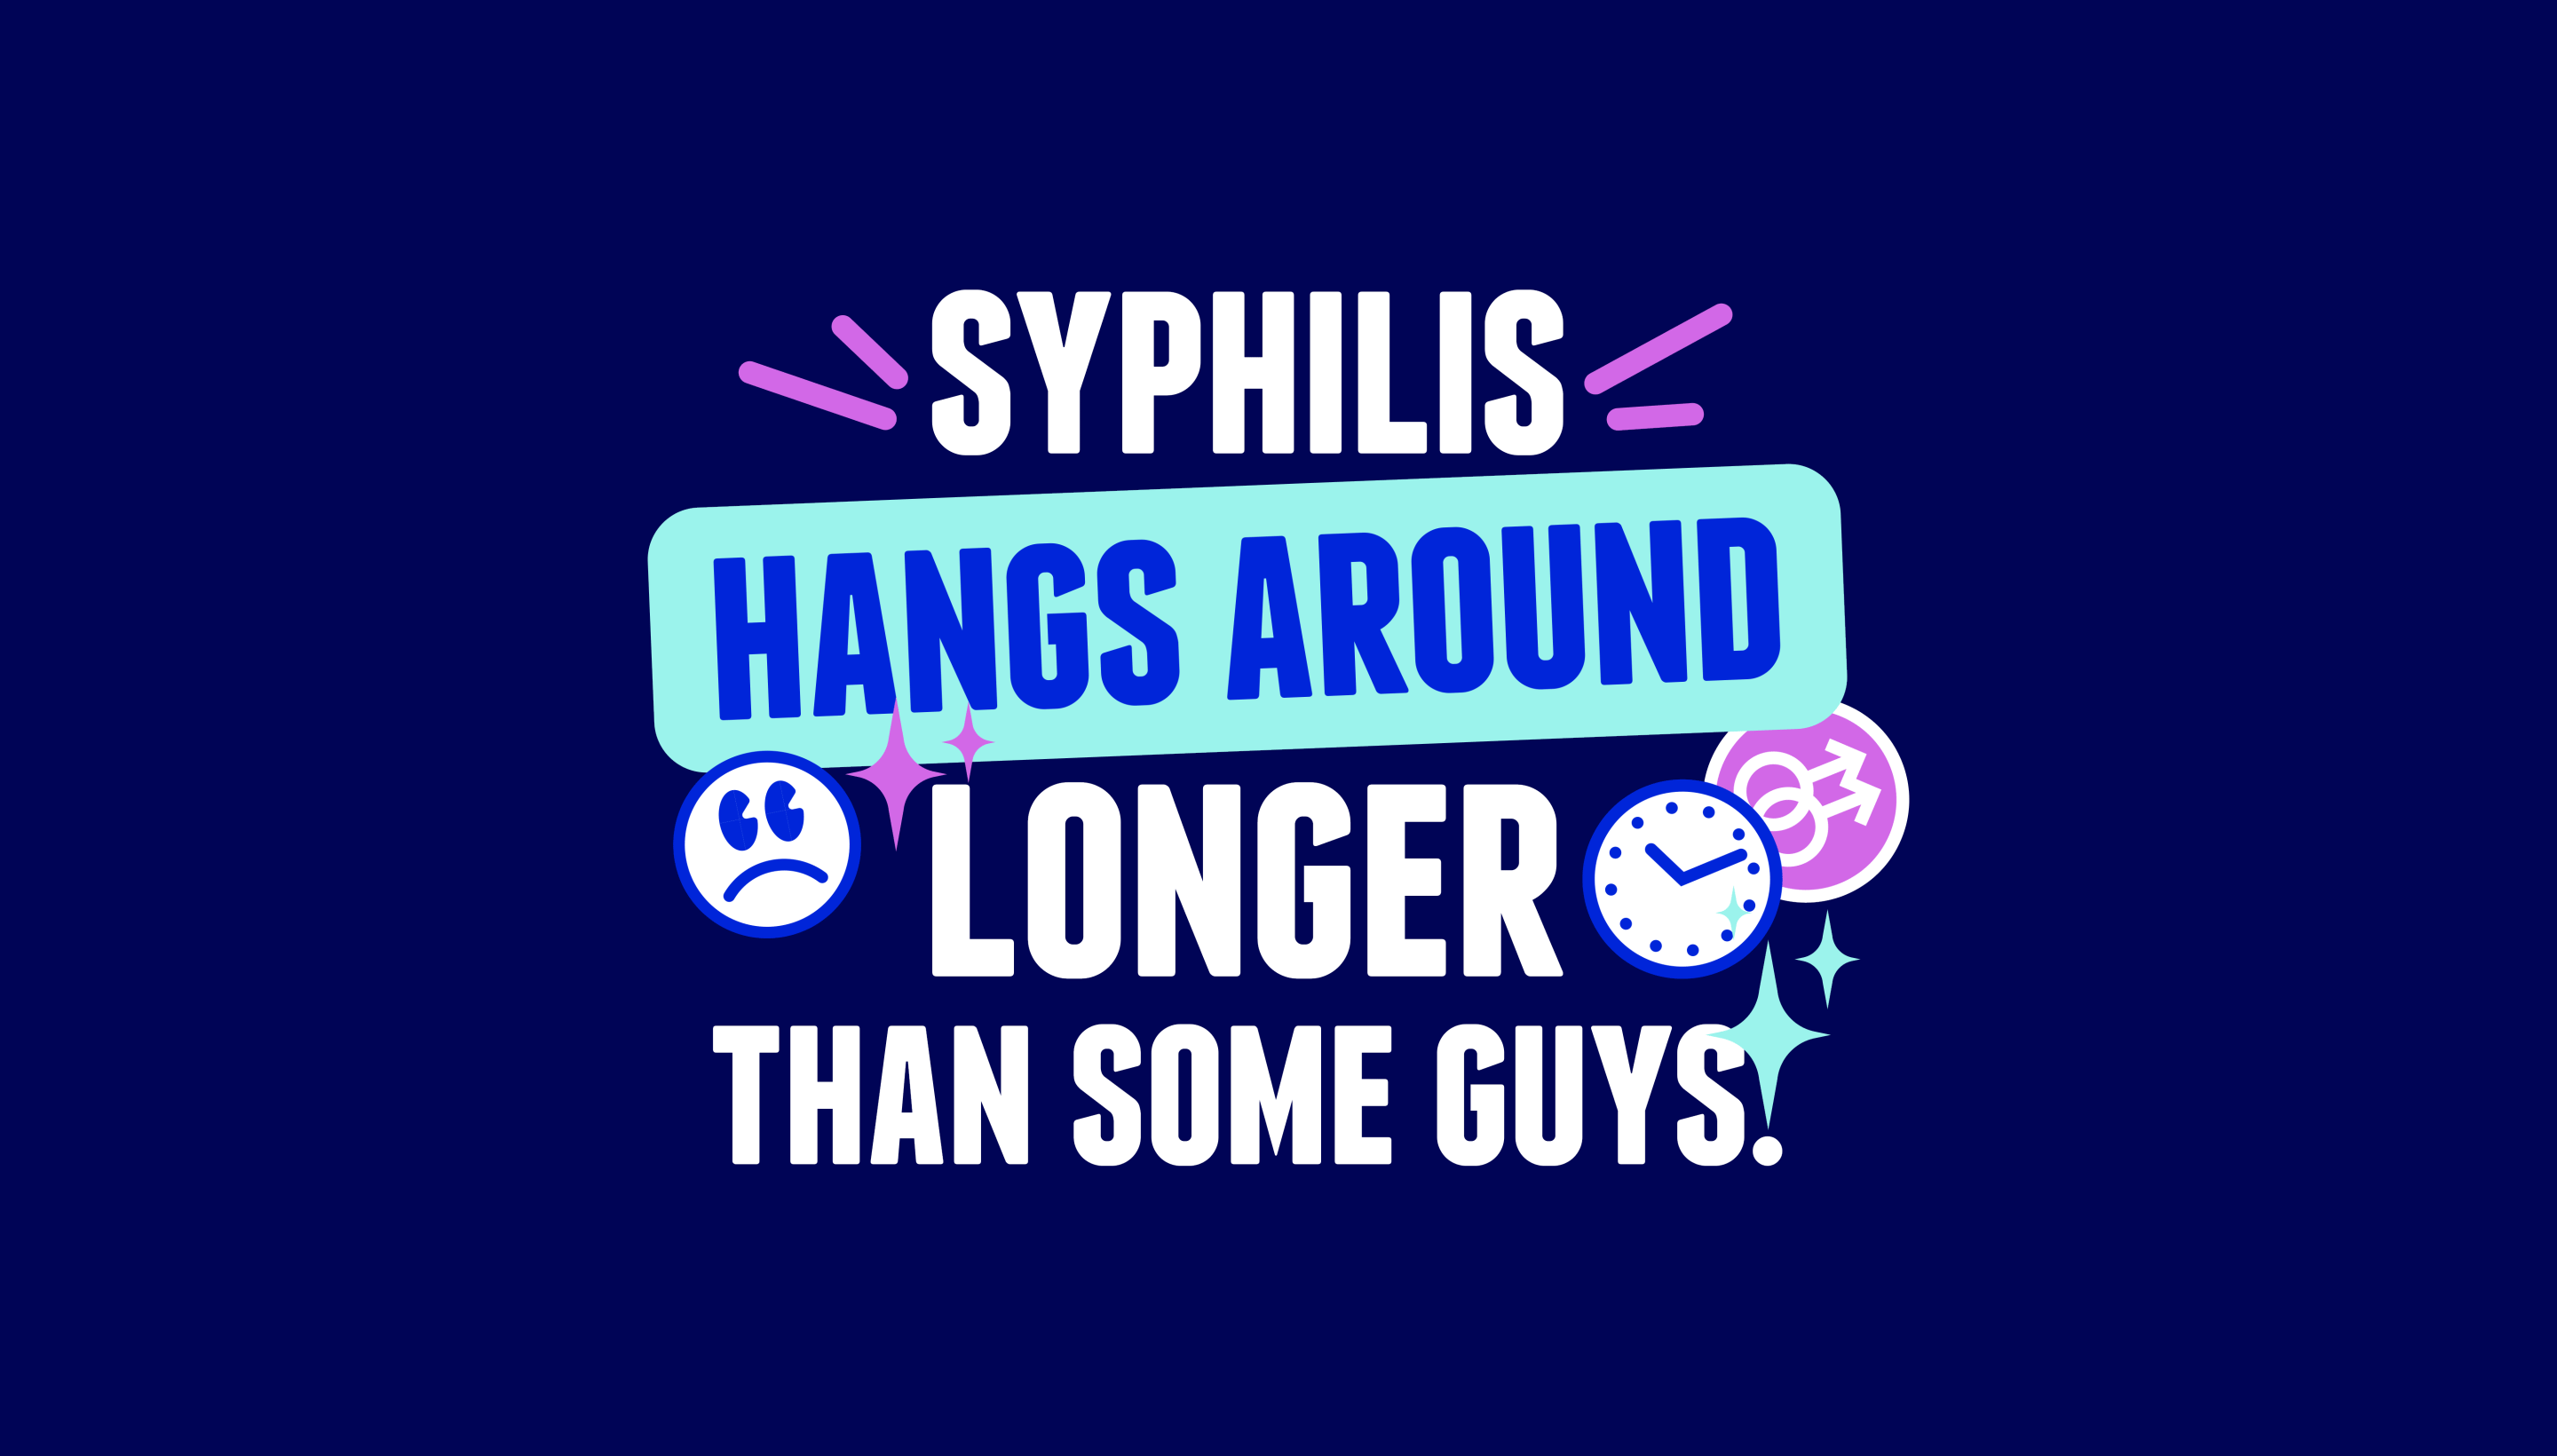 Don't fool around with syphilis